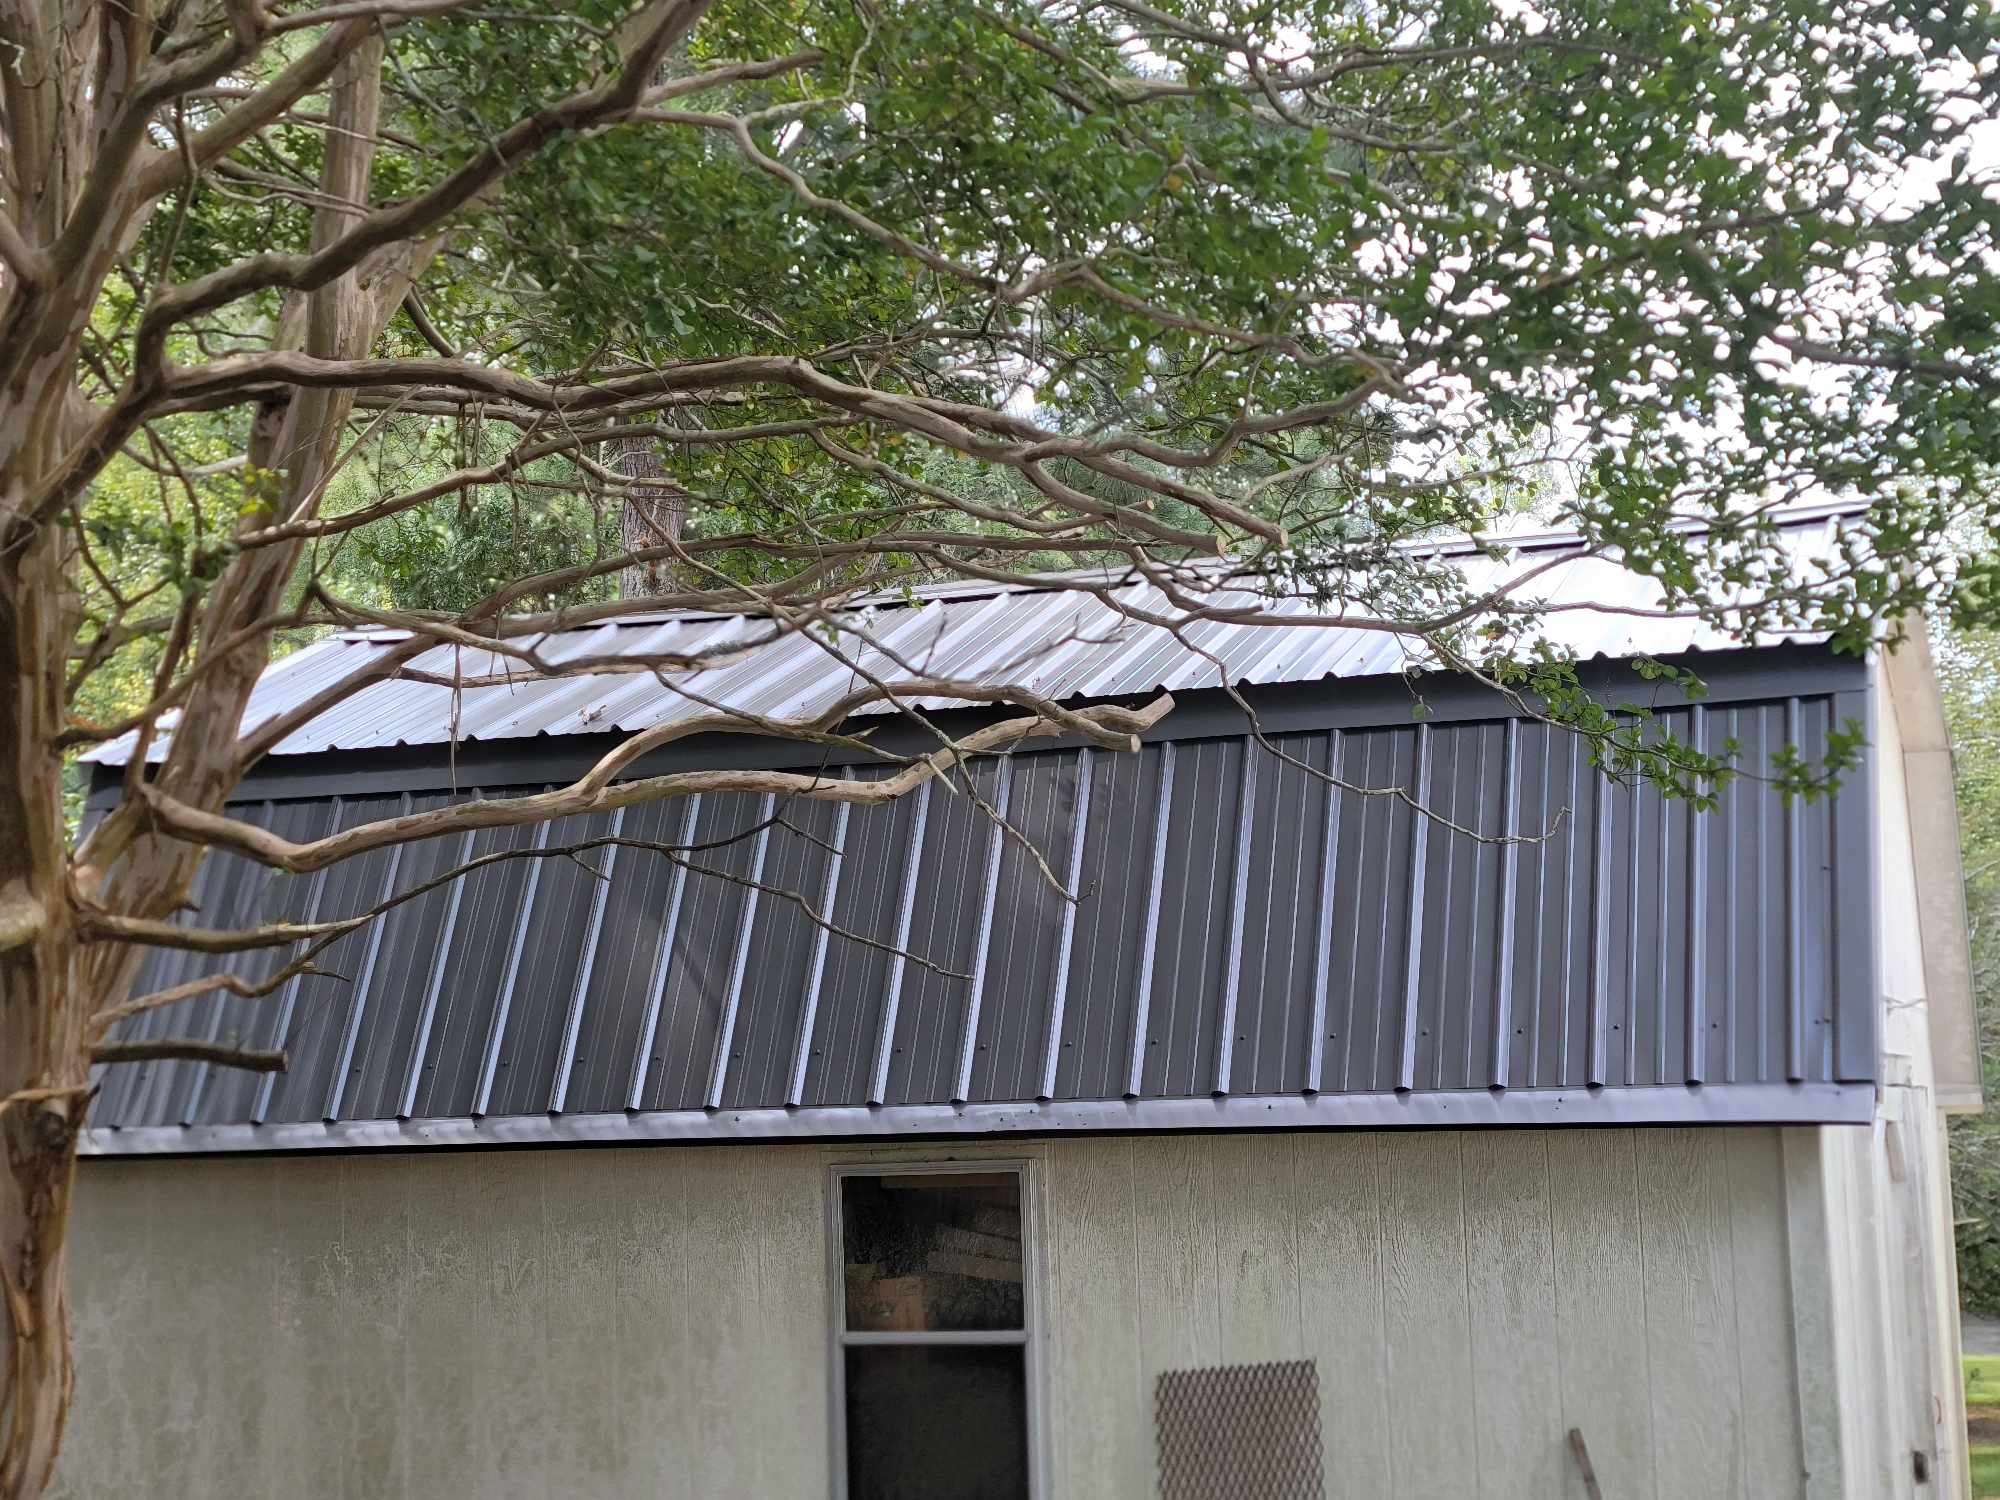 Metal roofing service in Hillsborough, NC on a shed